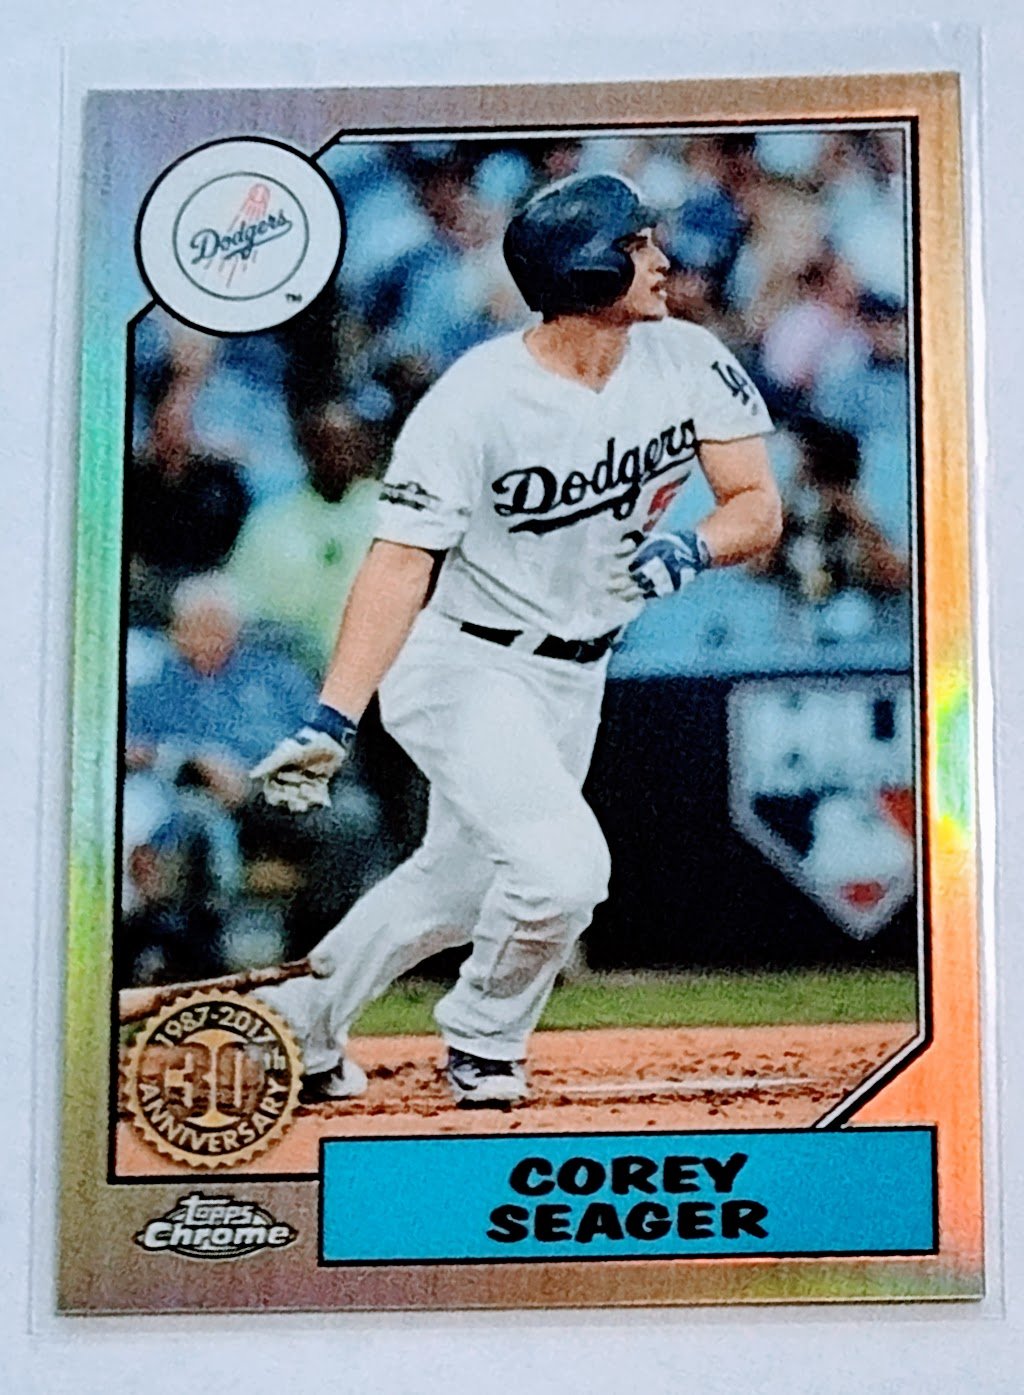 2017 Topps Corey Seager 1987 35th Anniversary Refractor Baseball Card TPTV simple Xclusive Collectibles   